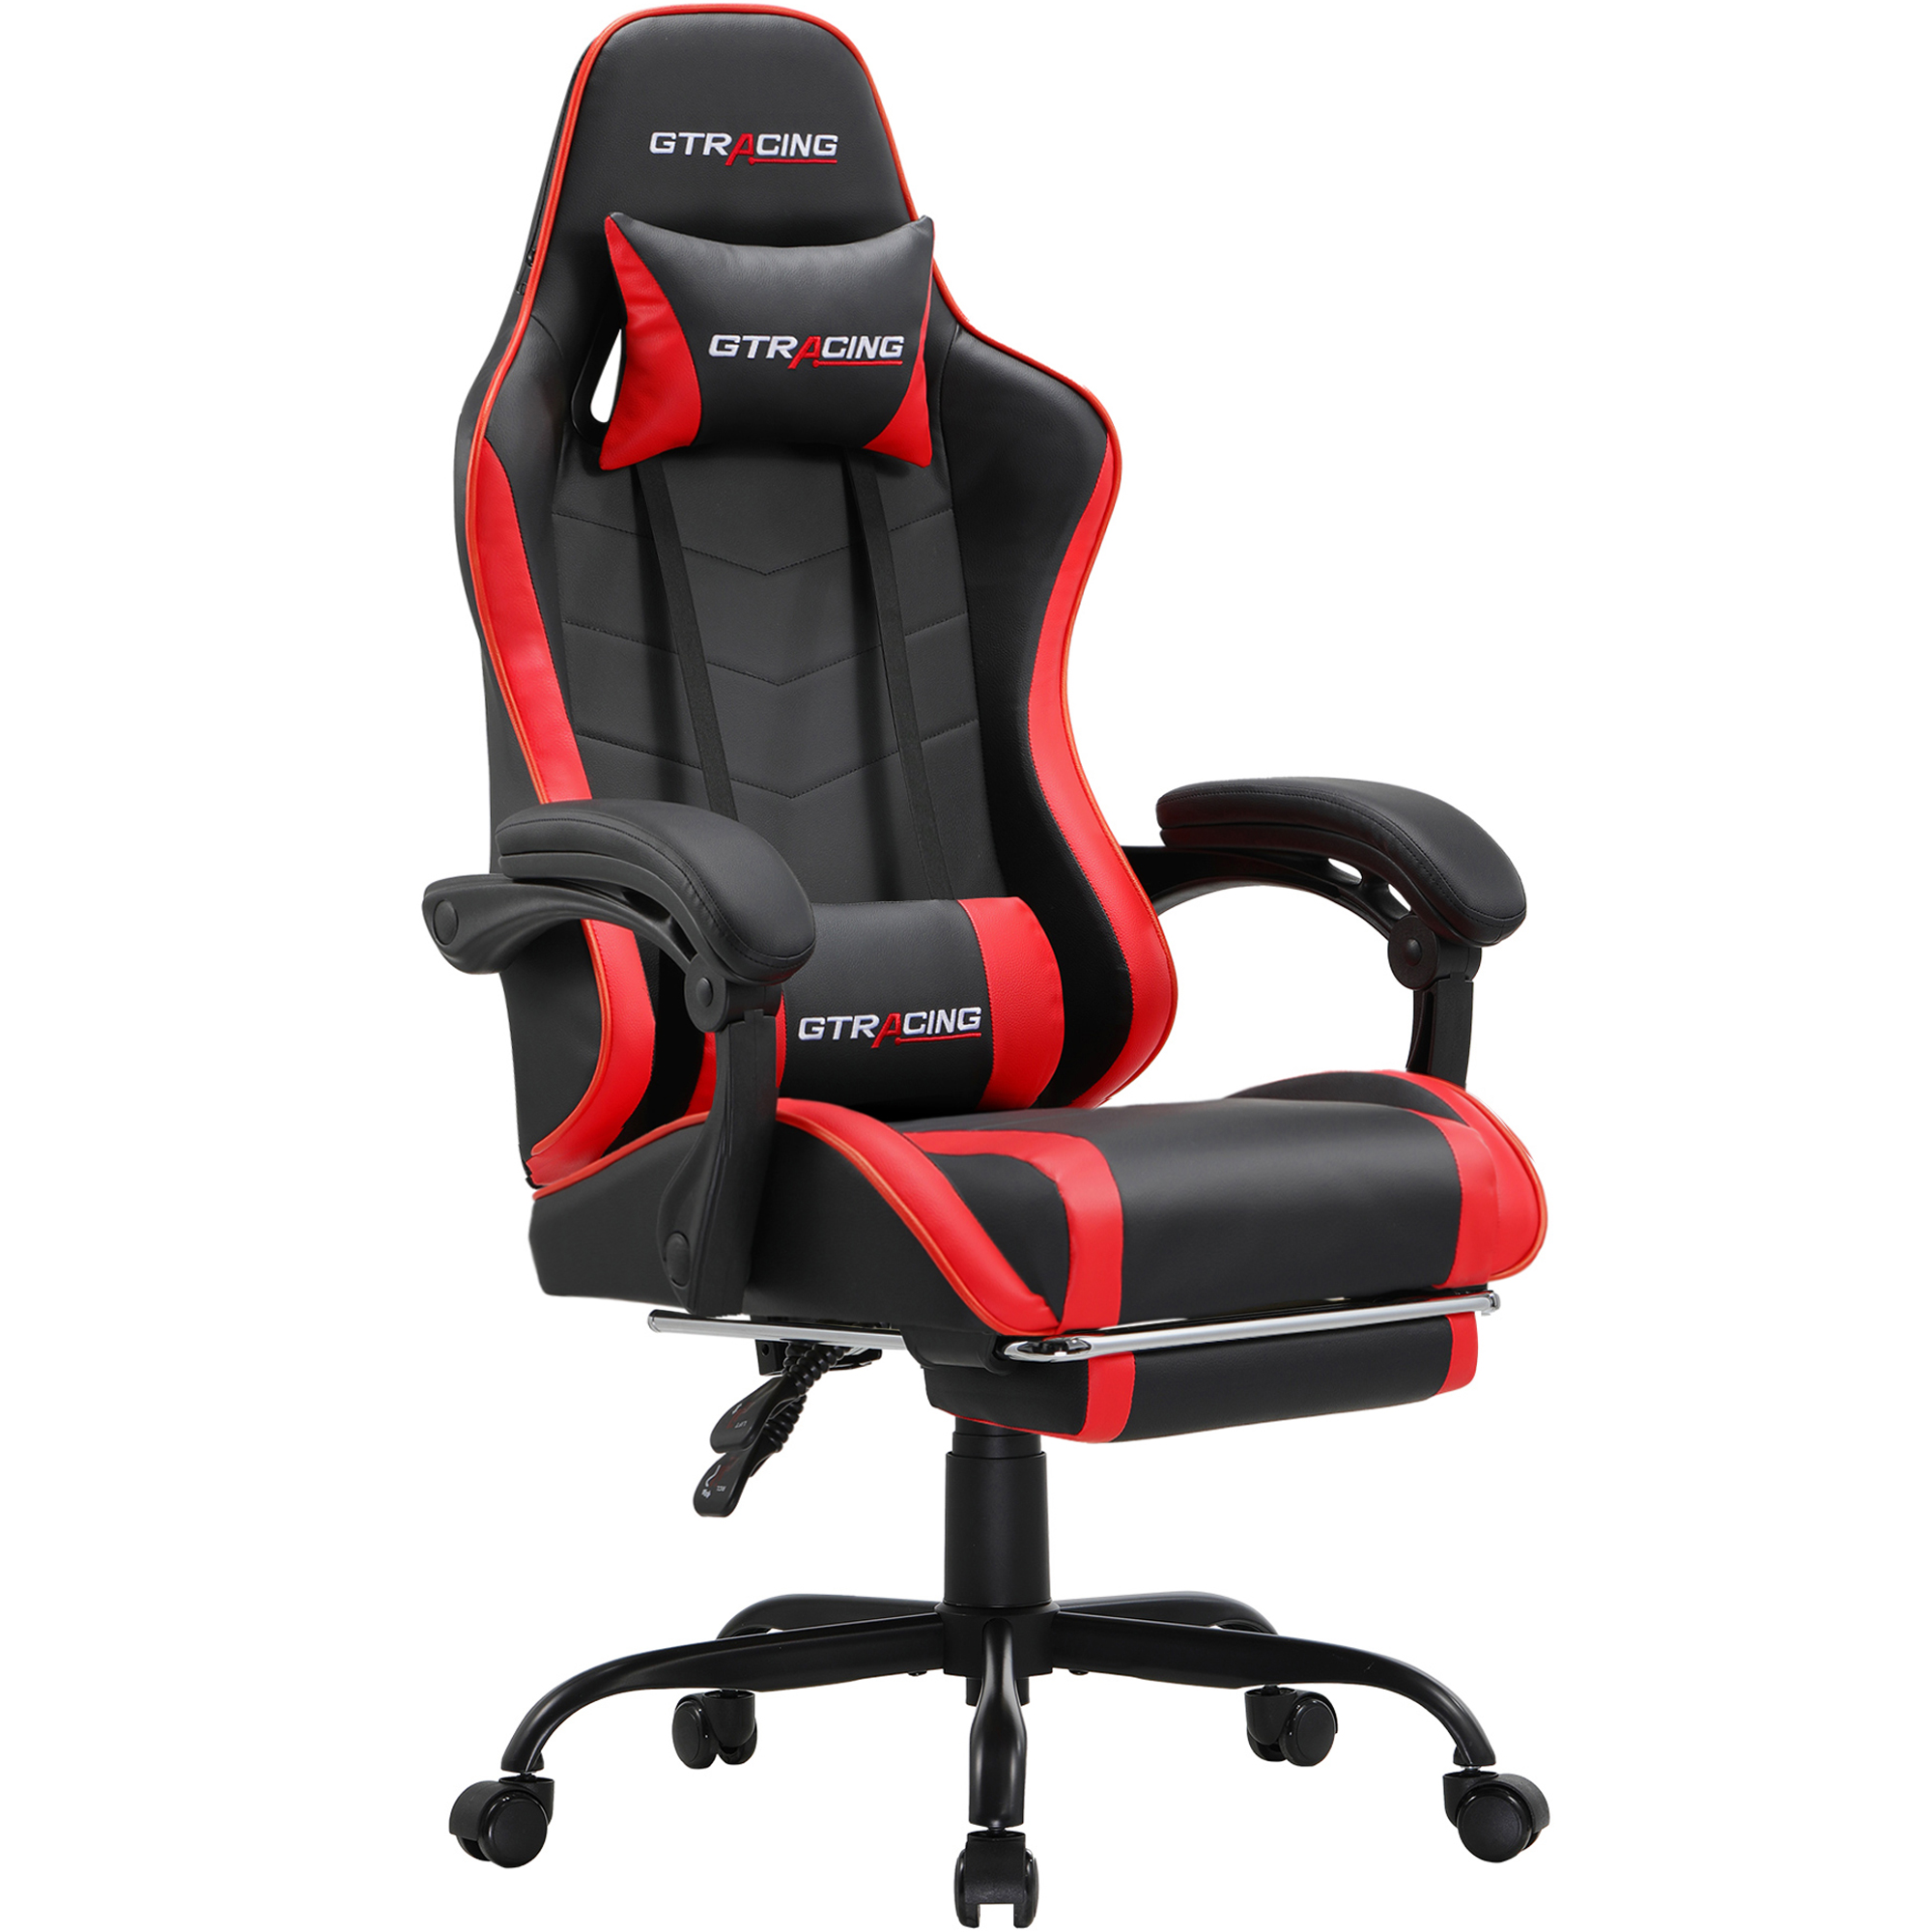 GTRACING GTWD-200 Gaming Chair with Footrest, Height Adjustable Office Swivel Recliner, Red - image 1 of 8